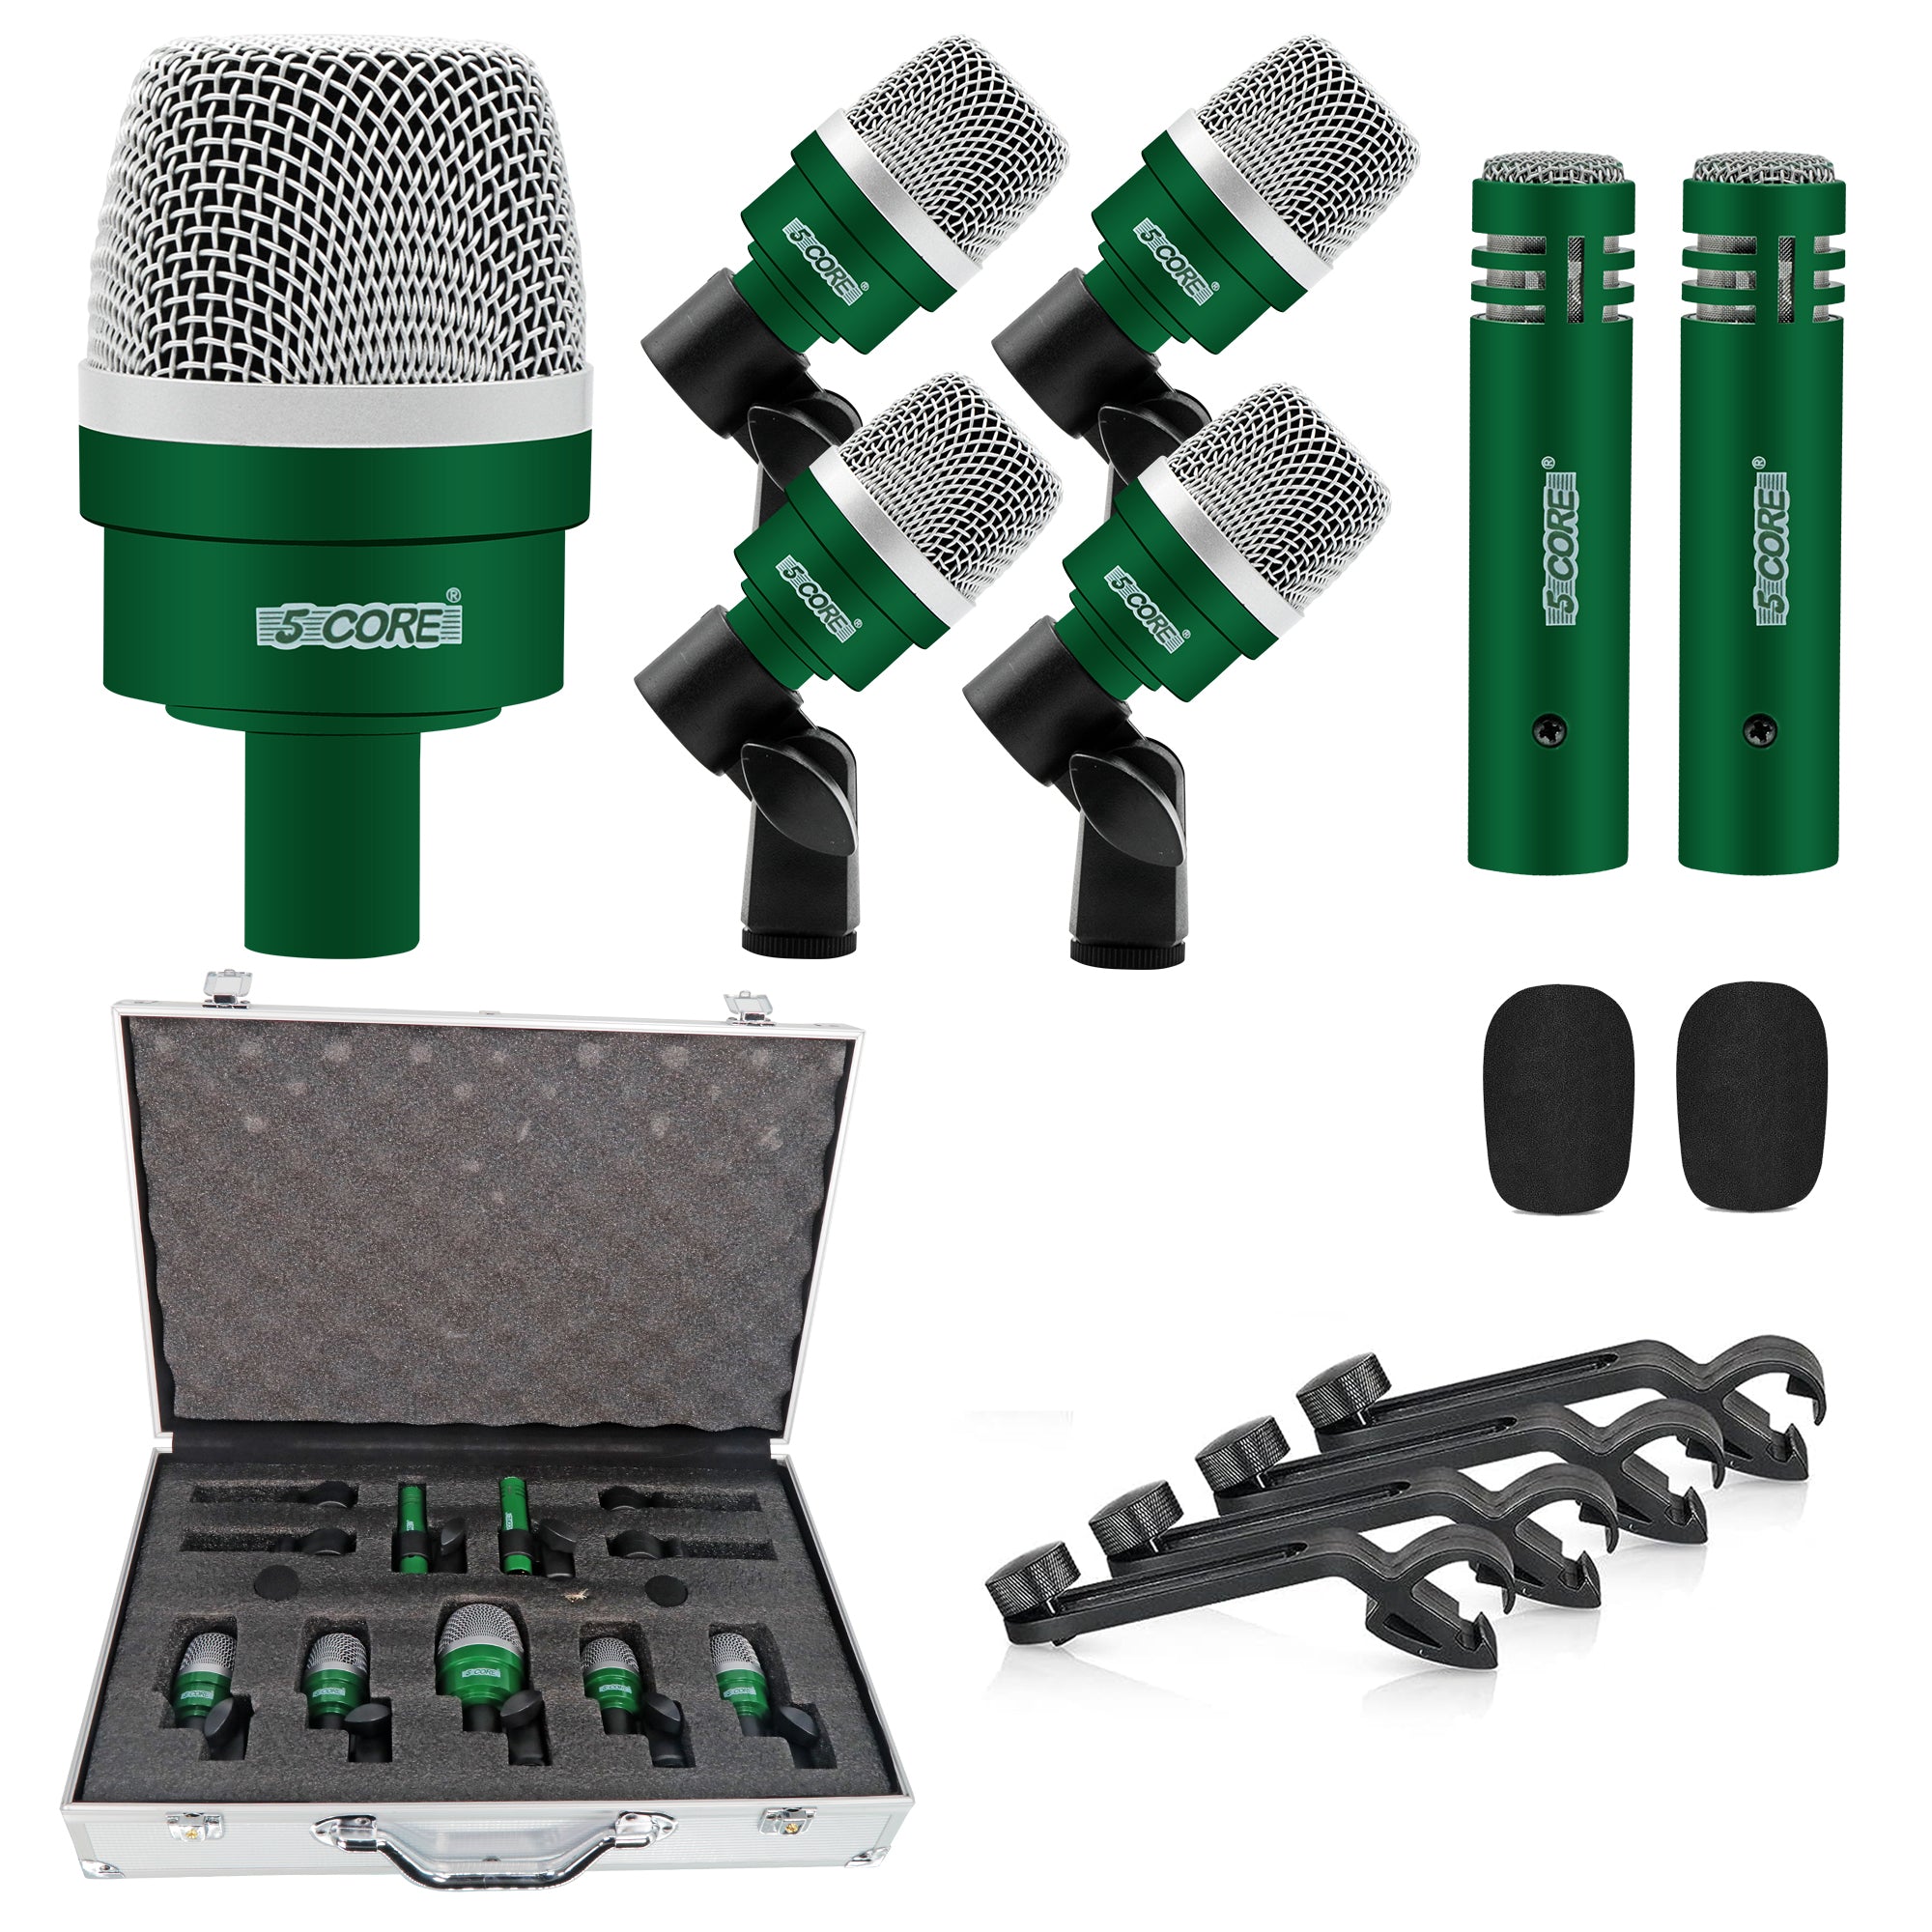 5 CORE 7 Piece Green Drum Microphone Kit Wired Dynamic XLR Mics Kick Bass Tom Snare and Cymbals Microphones Set for Drums